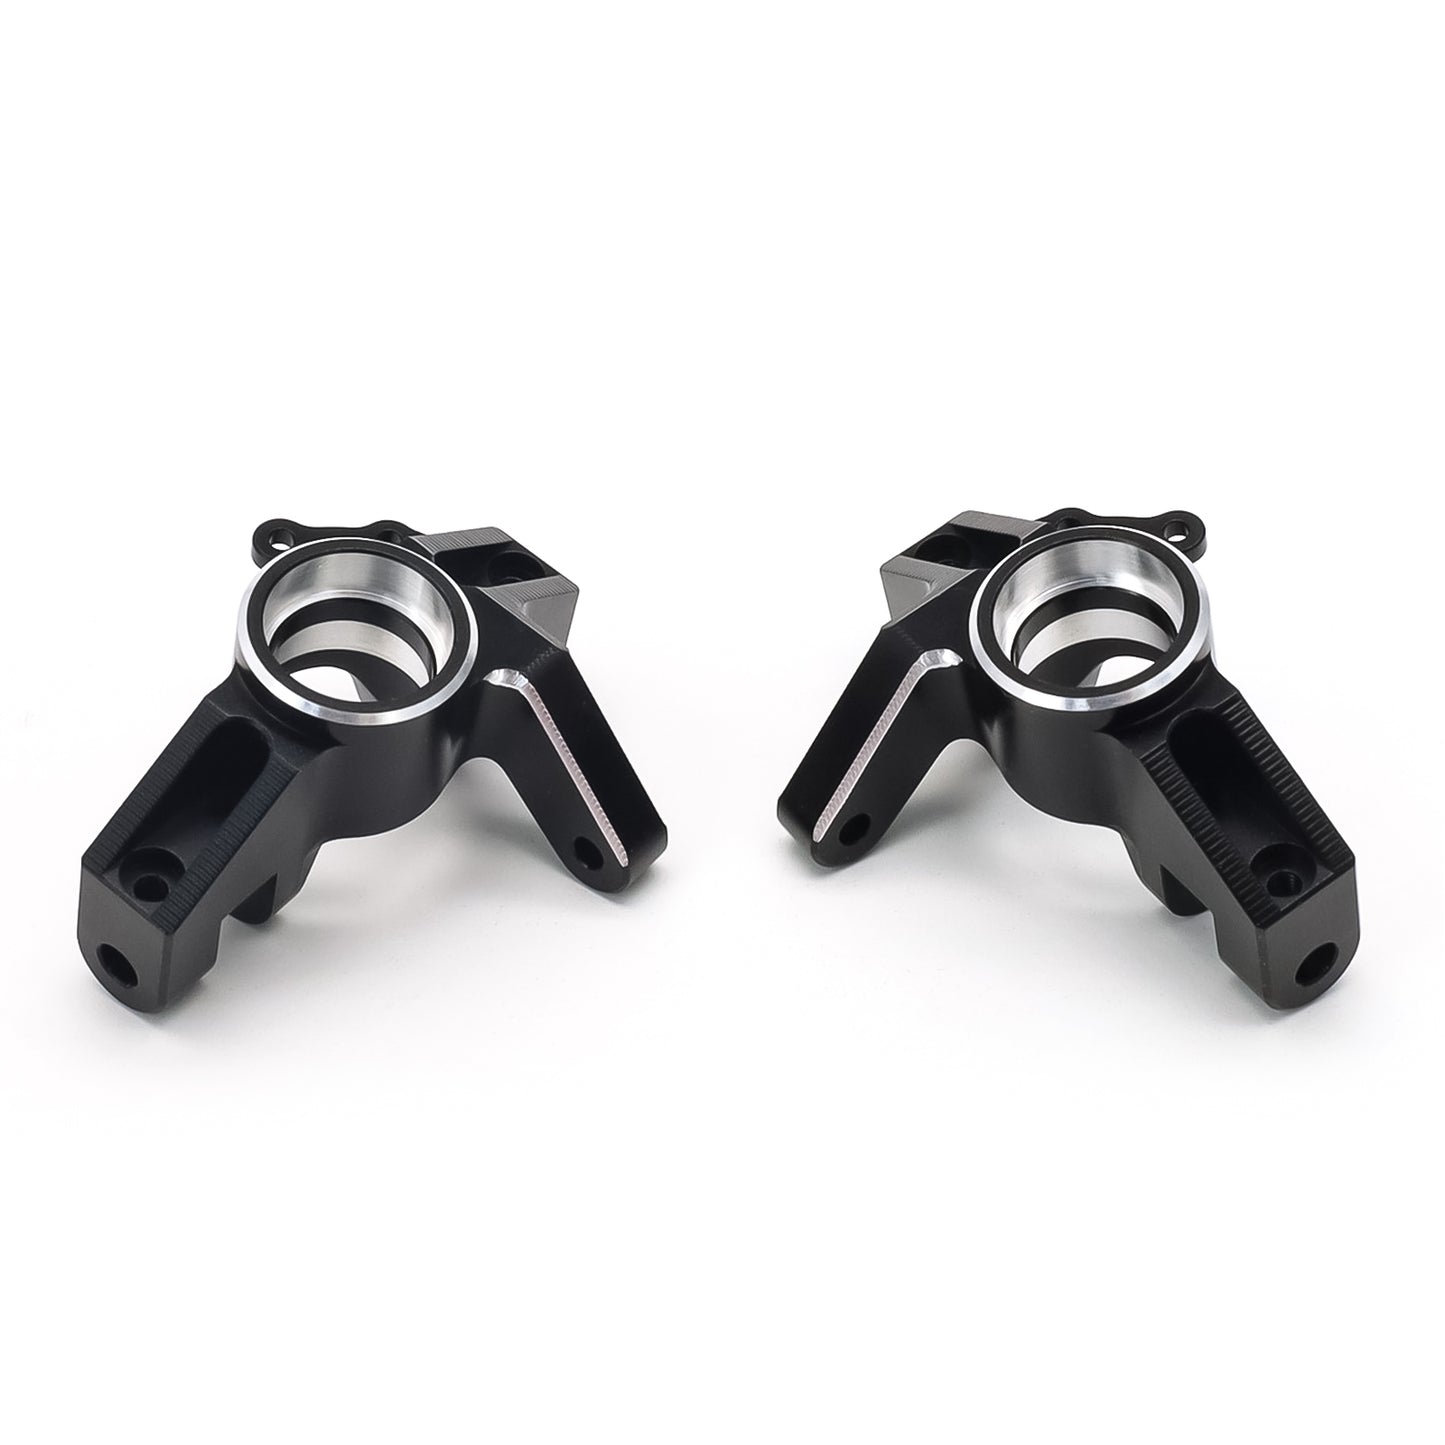 TREAL Alu# 7075 Front Steering Knuckles (Left&Right) for 1/10 Losi HAMMER REY U4